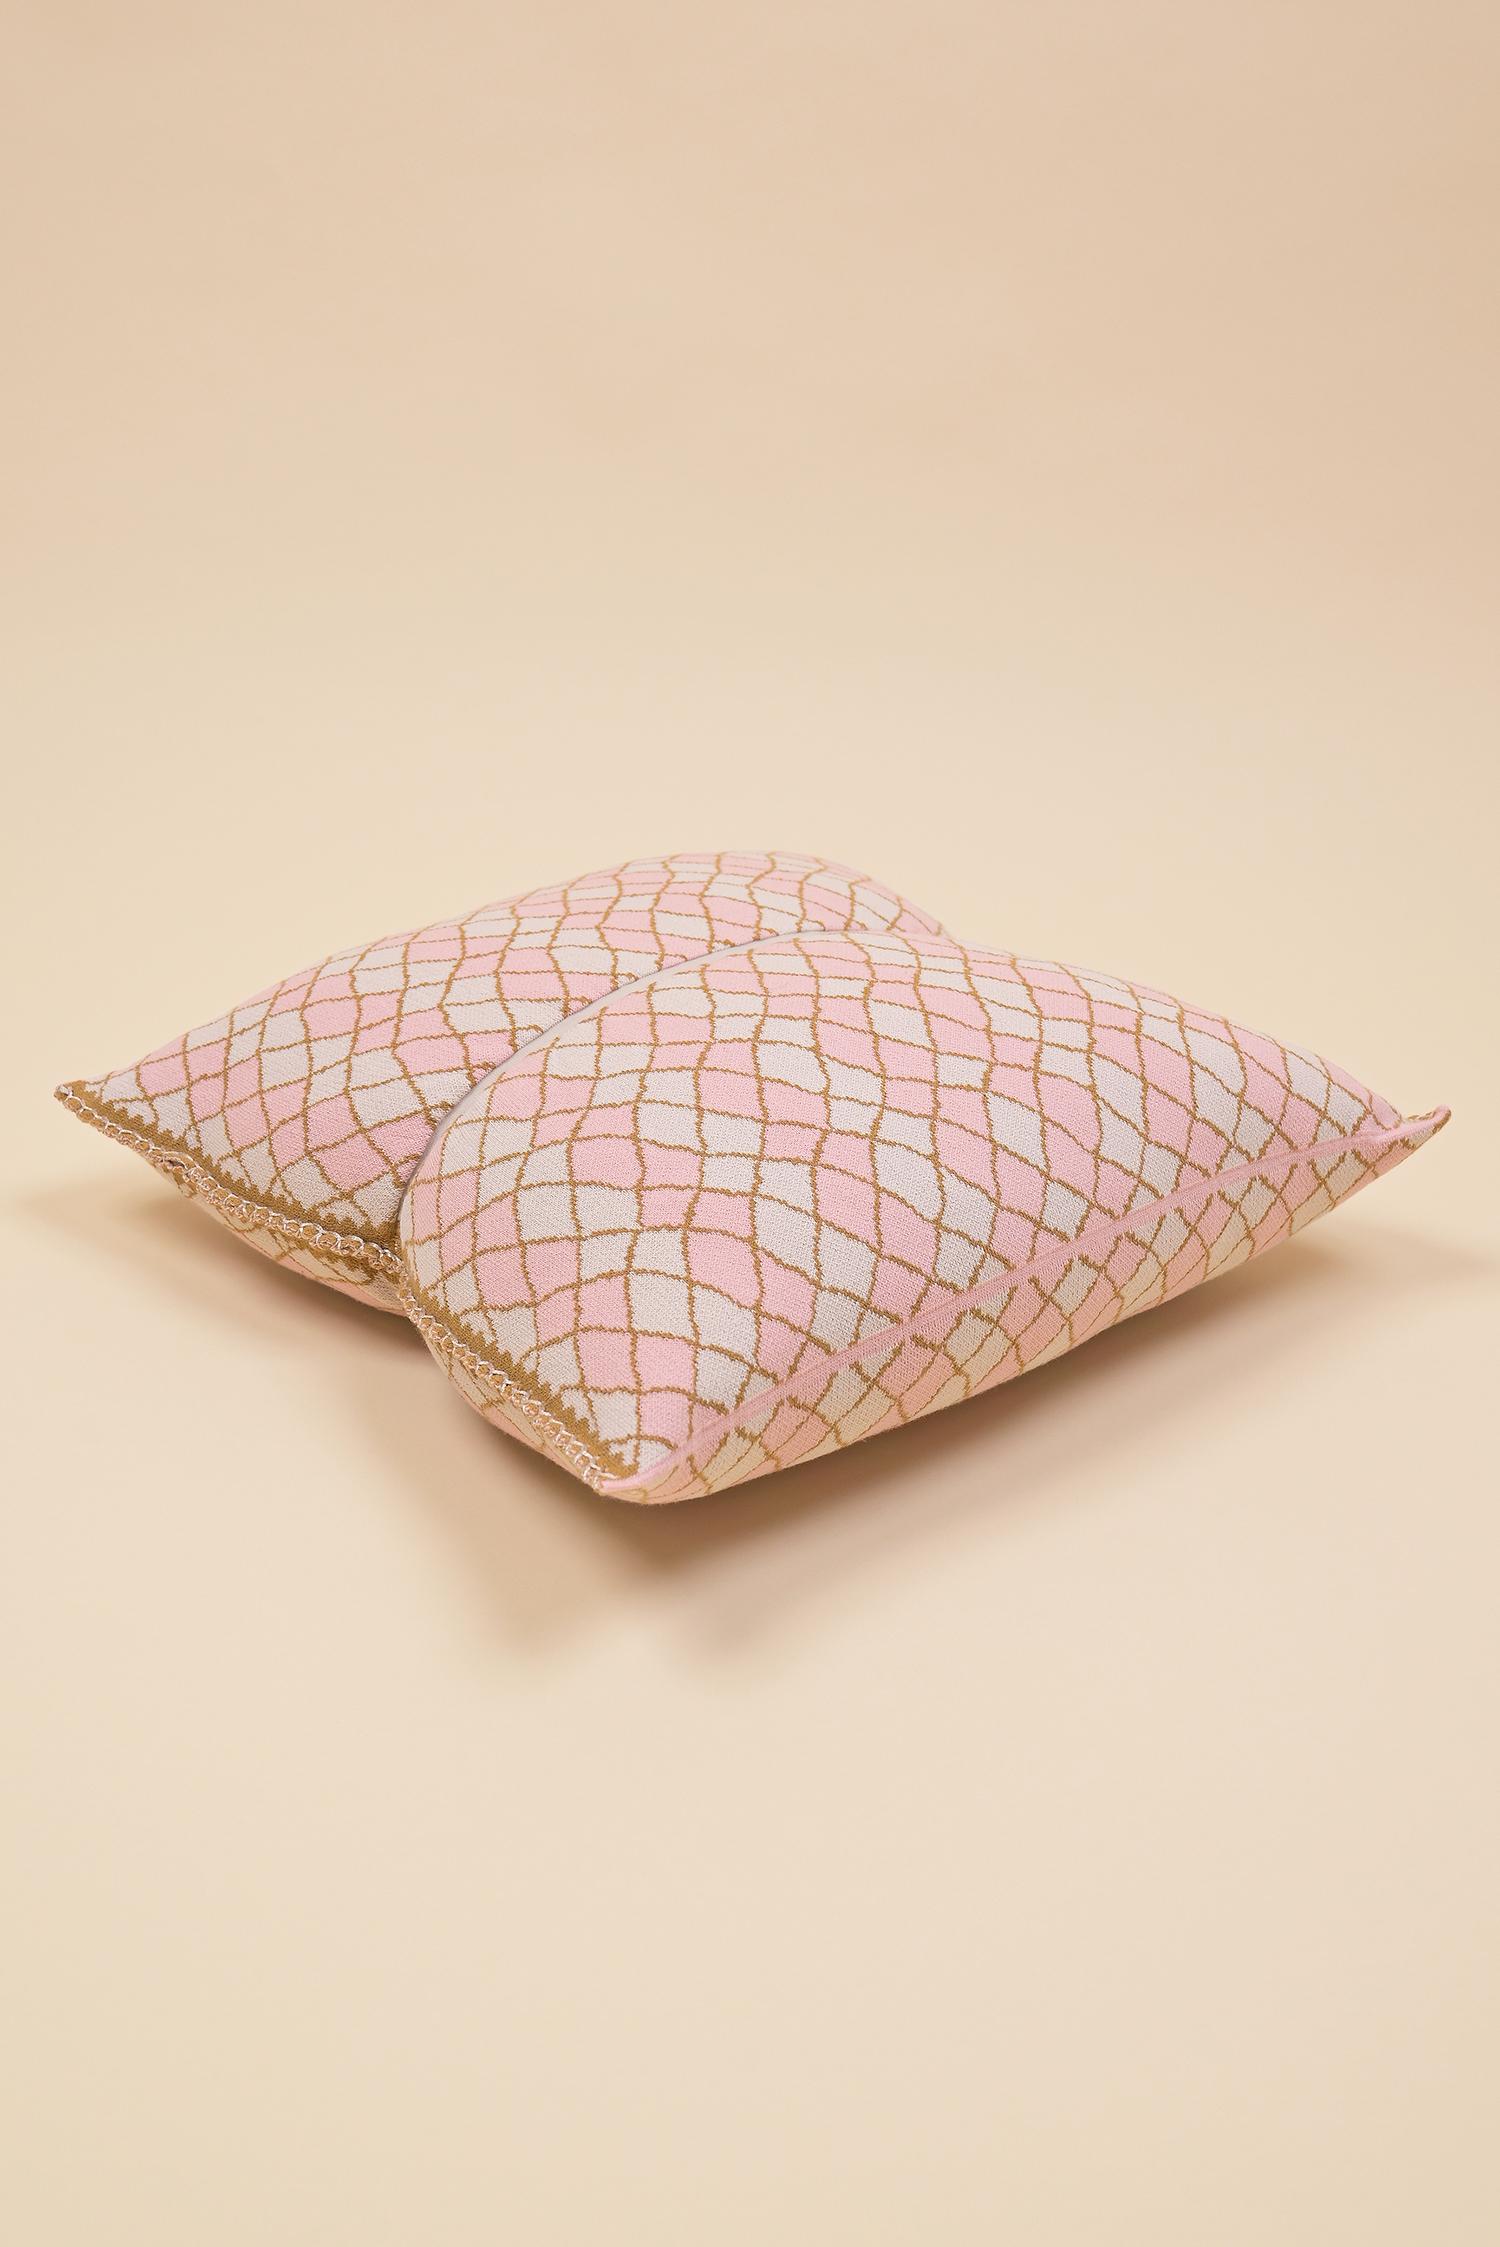 This product belongs to our Collection N°2 - a collection that explores the delicate process of blending in from a social point of view.

Soft and with a unique form - this pillowcase brings high comfort and color to your home. It is made from